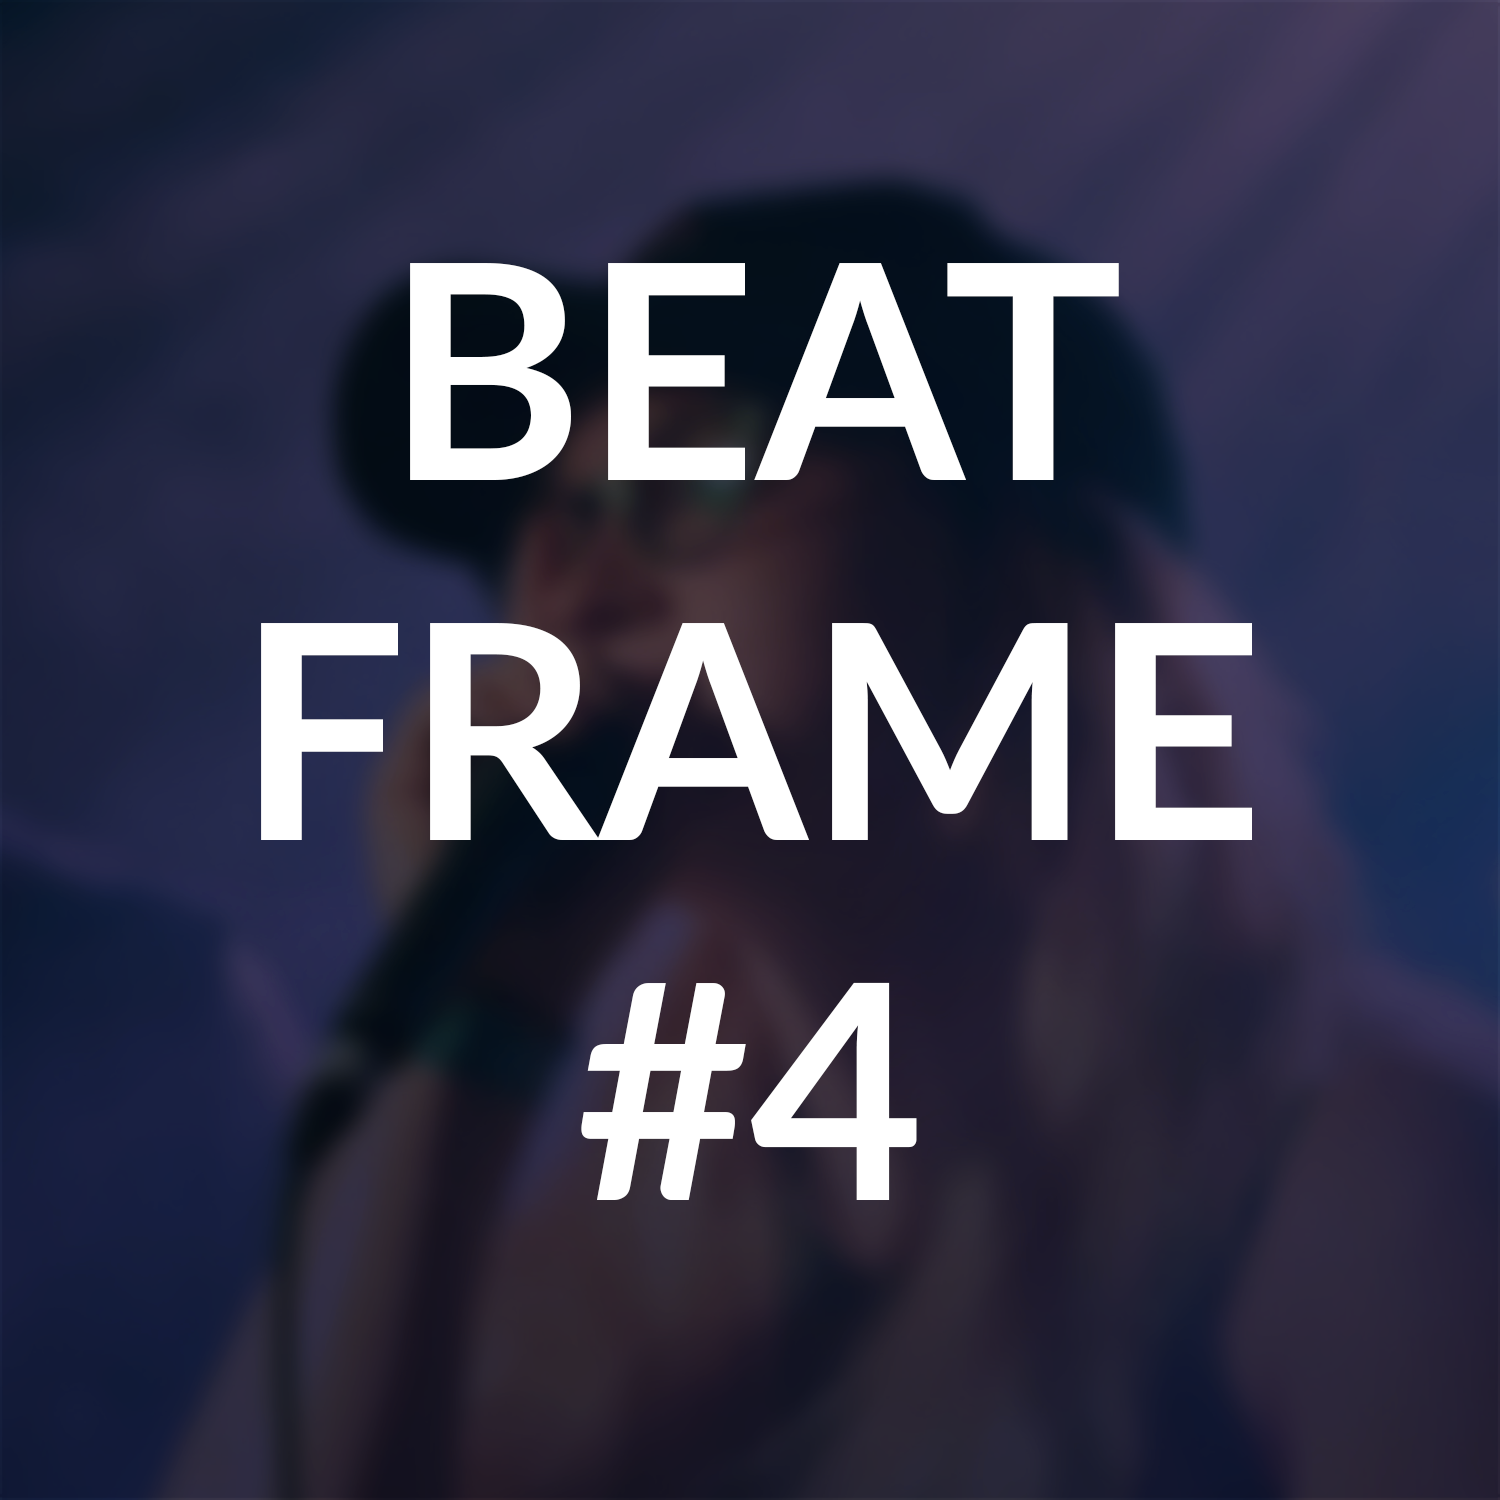 Beat Frame 4 Human Beatbox Archive Tutorial Audio Learn to Beatbox